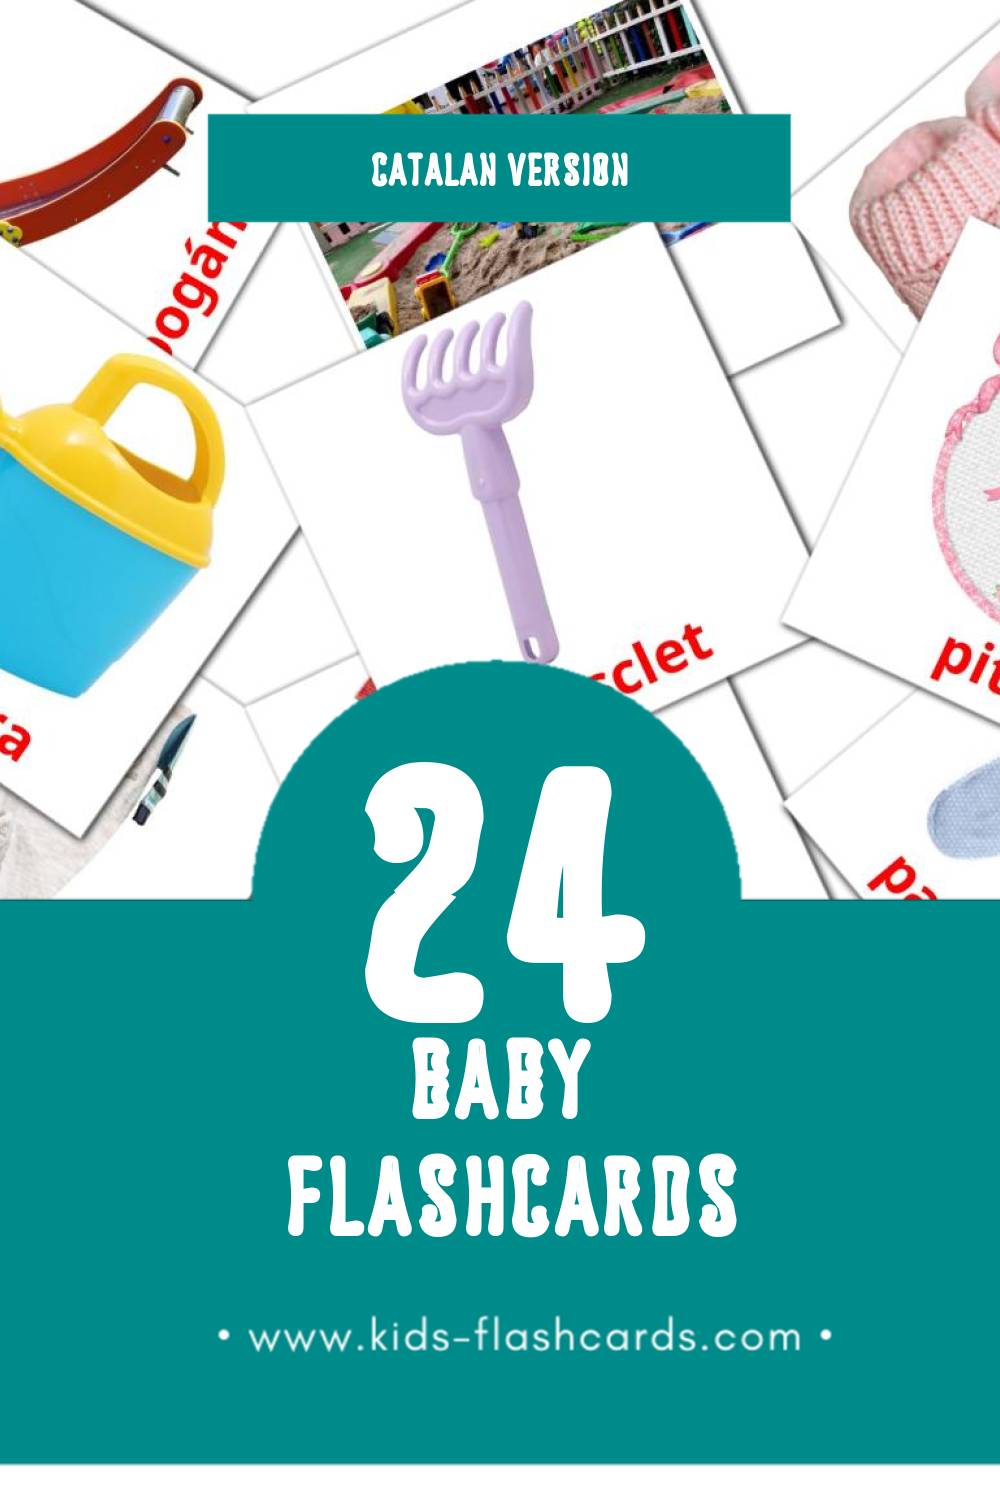 Visual Nadó Flashcards for Toddlers (25 cards in Catalan)